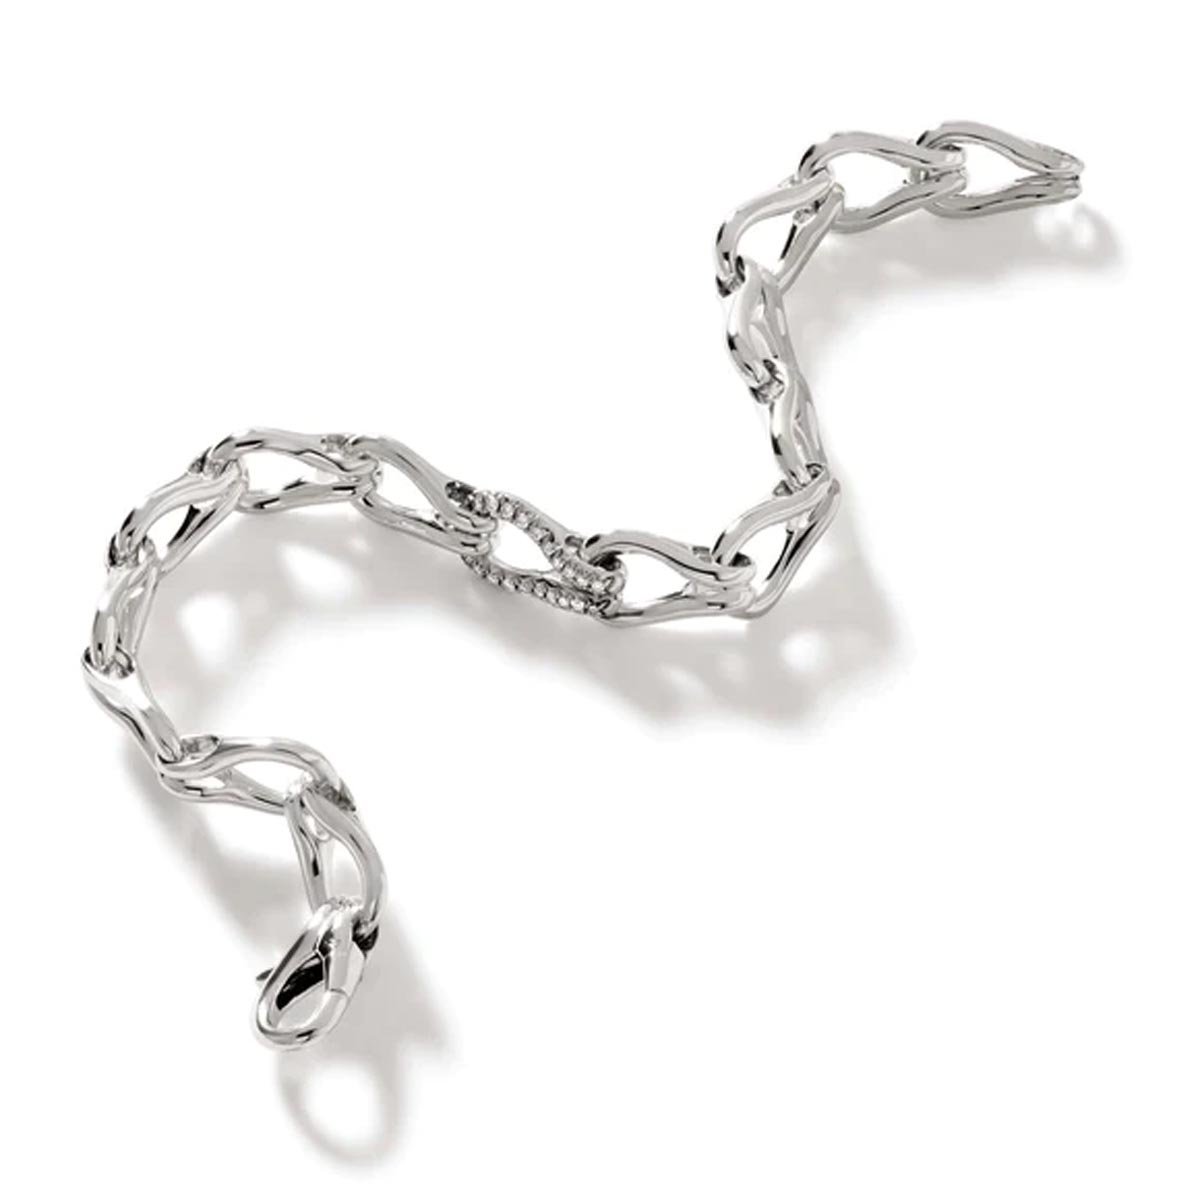 John Hardy Surf Collection Bracelet in Sterling Silver with Diamonds (1/5ct tw)